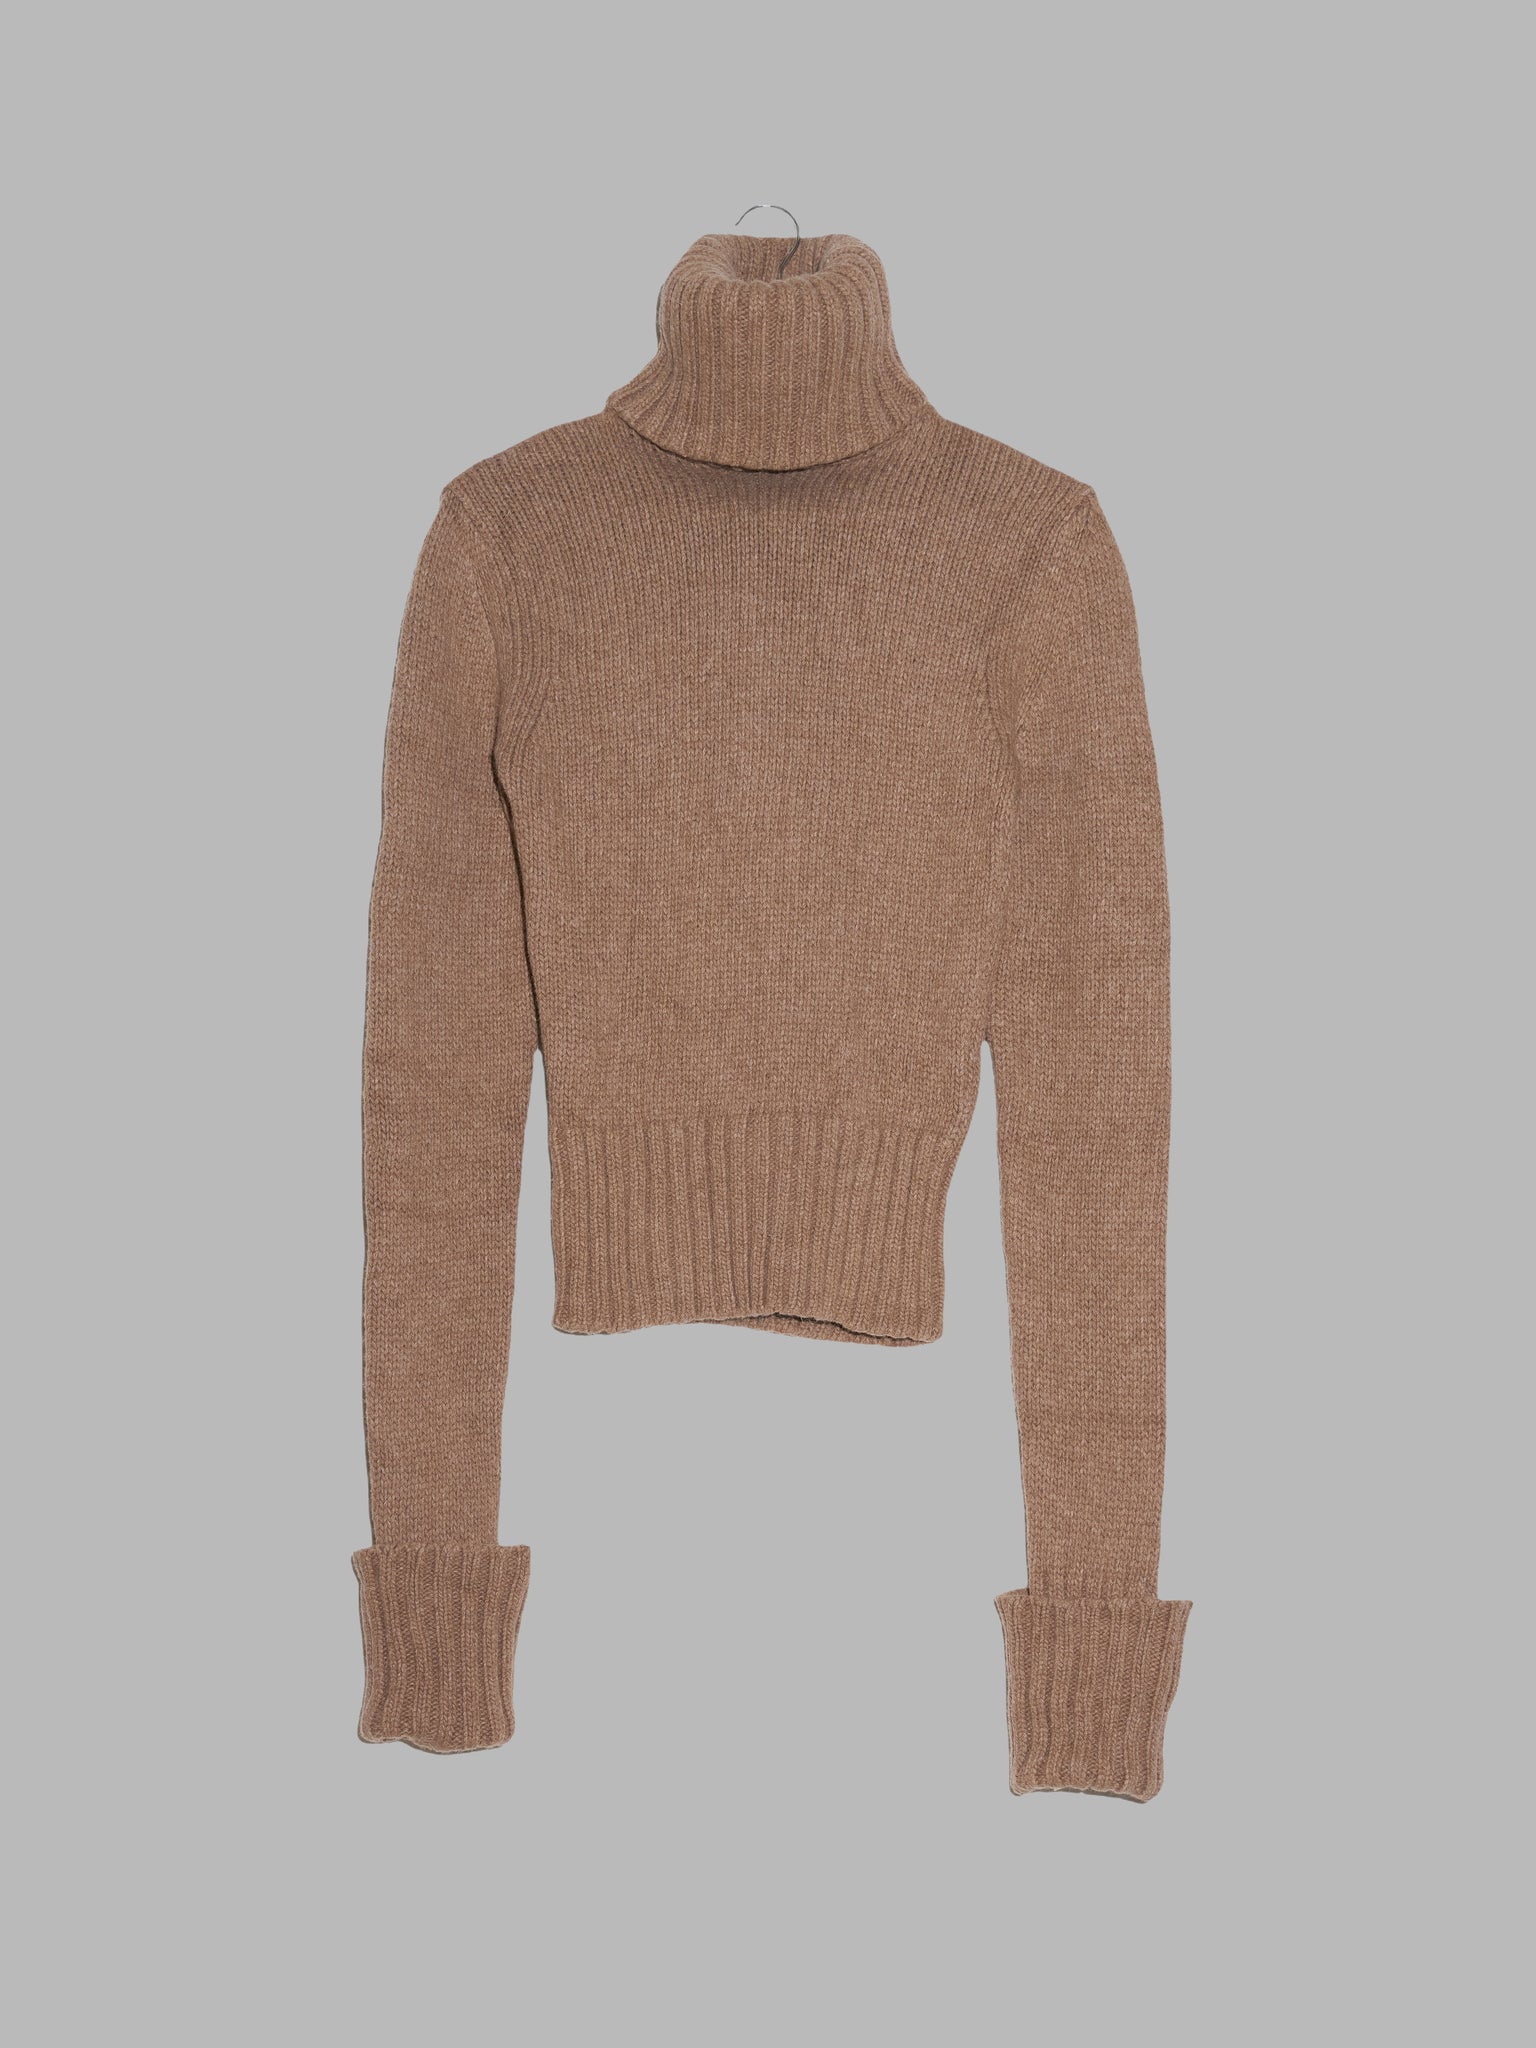 Viktor and Rolf brown wool extra long sleeve turtleneck jumper - size 40